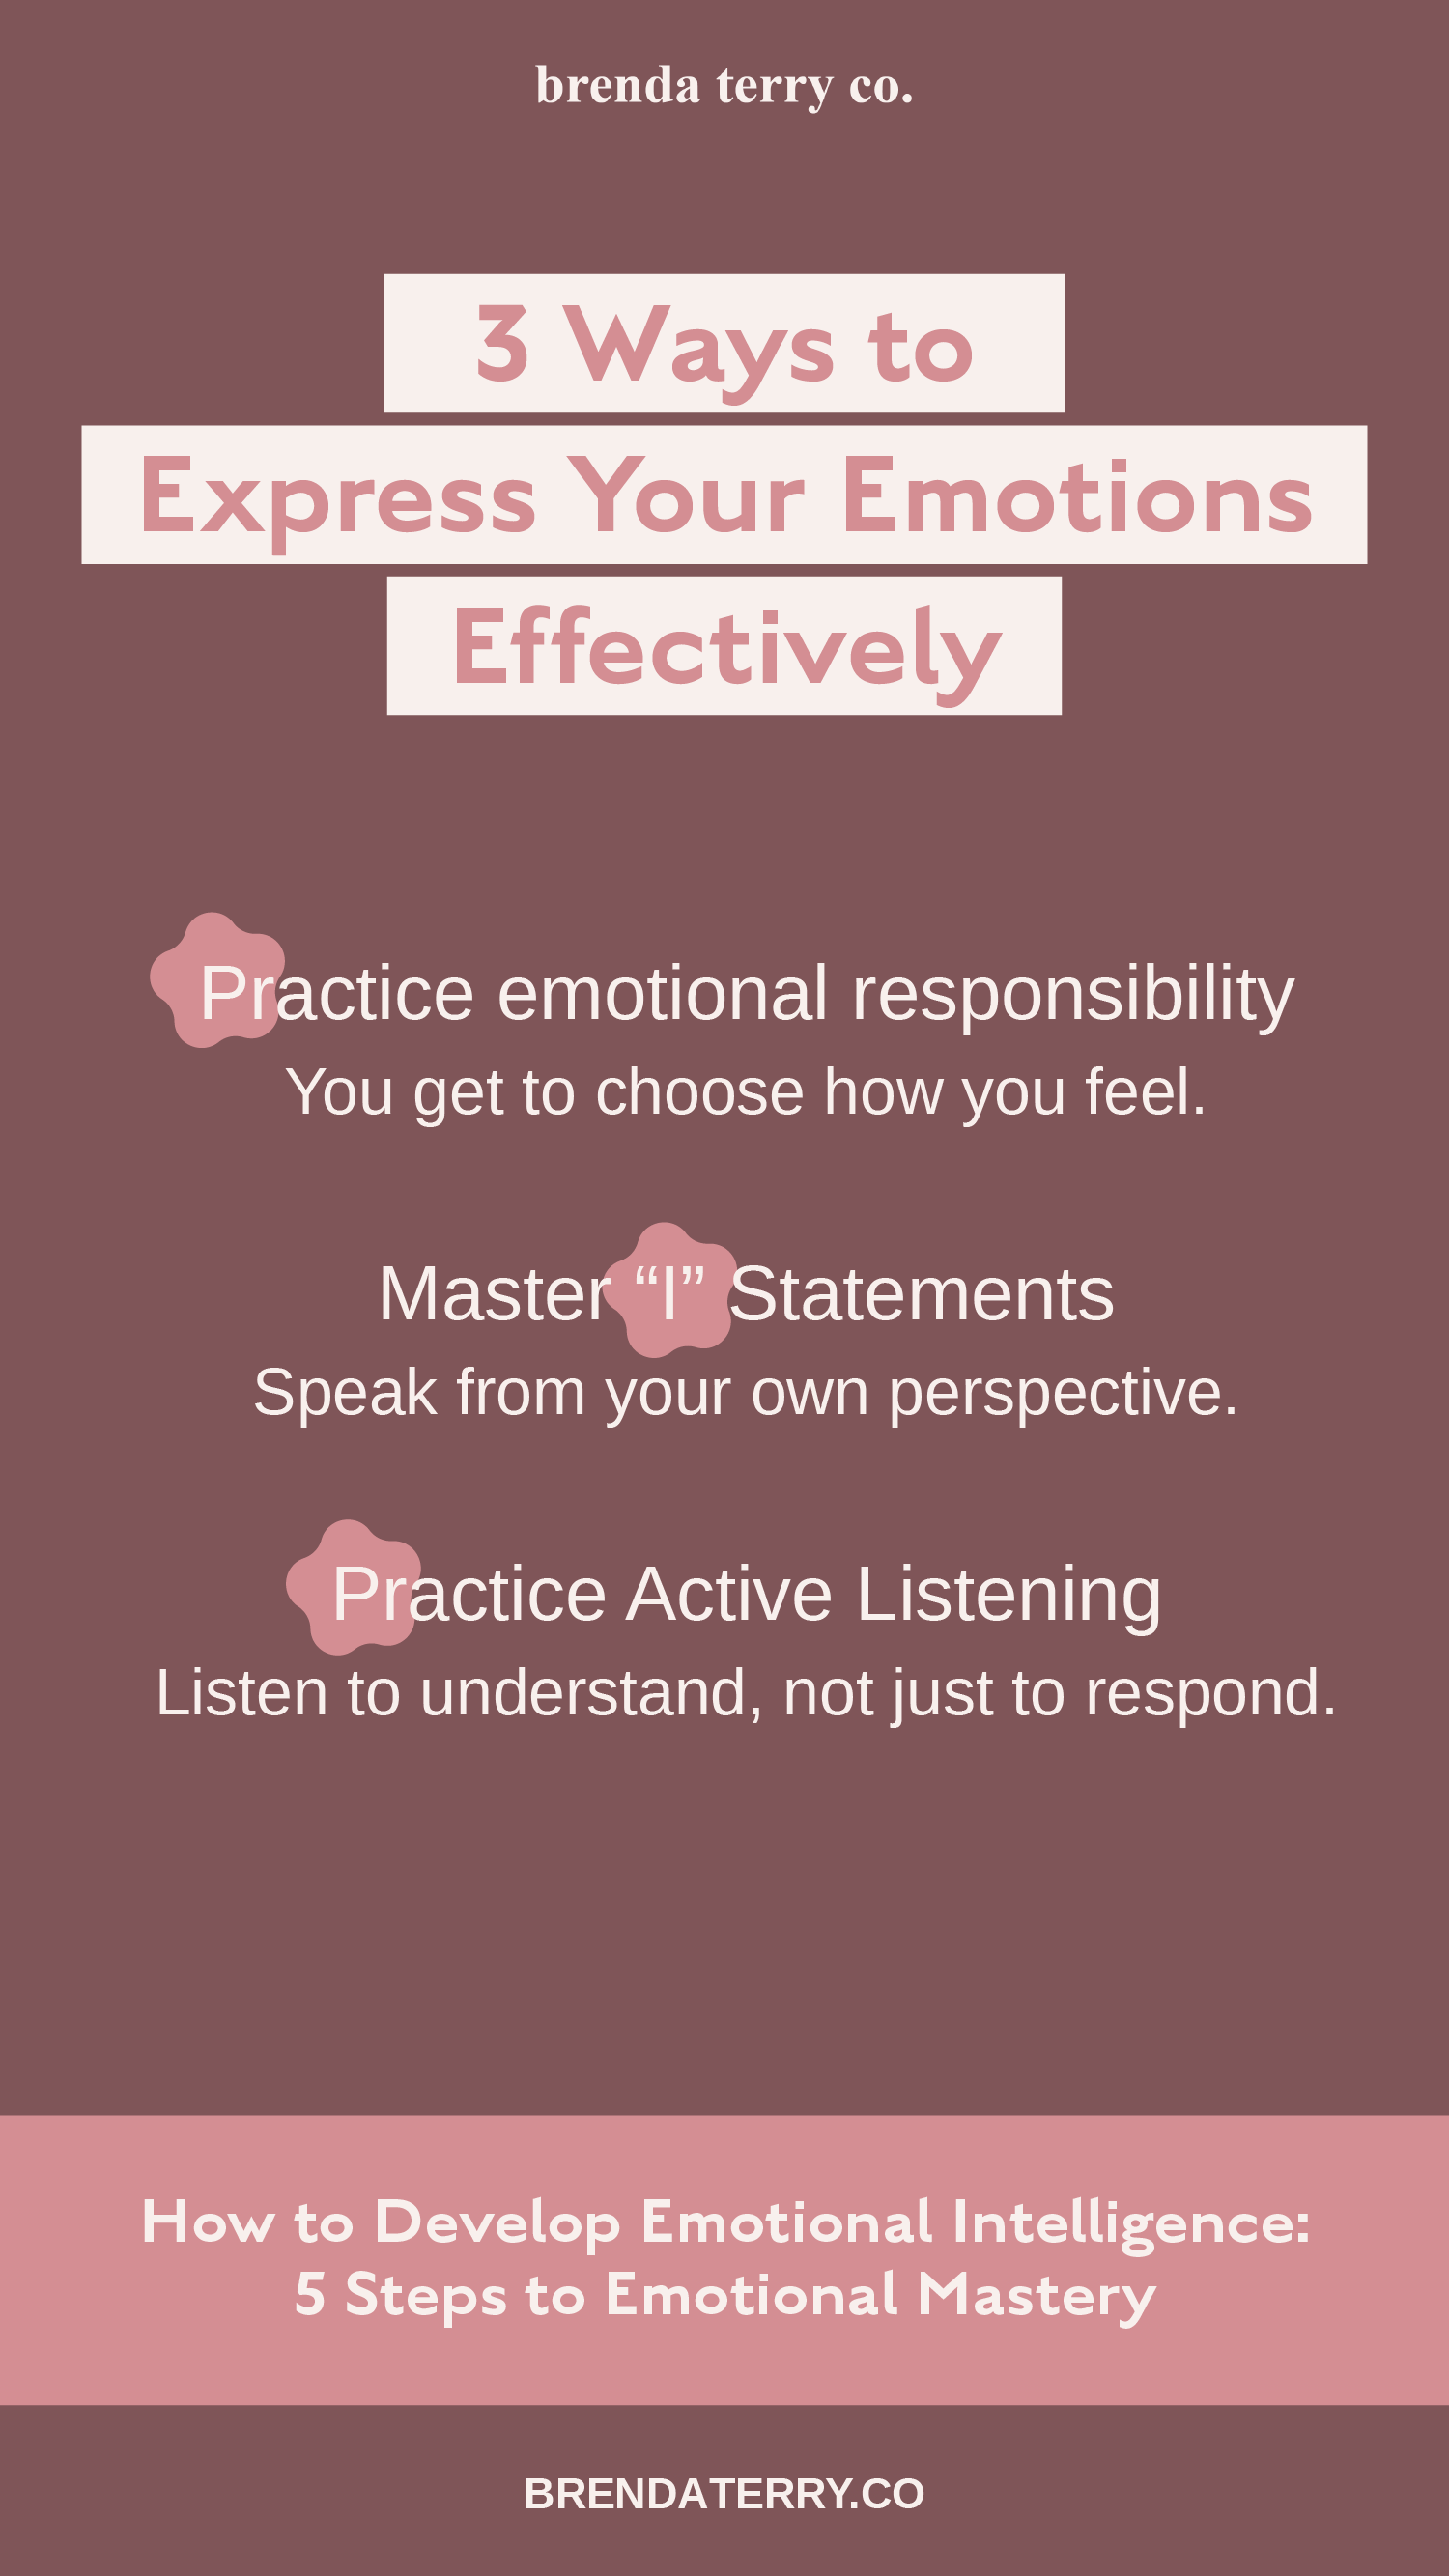 Strategies to Express Your Emotions